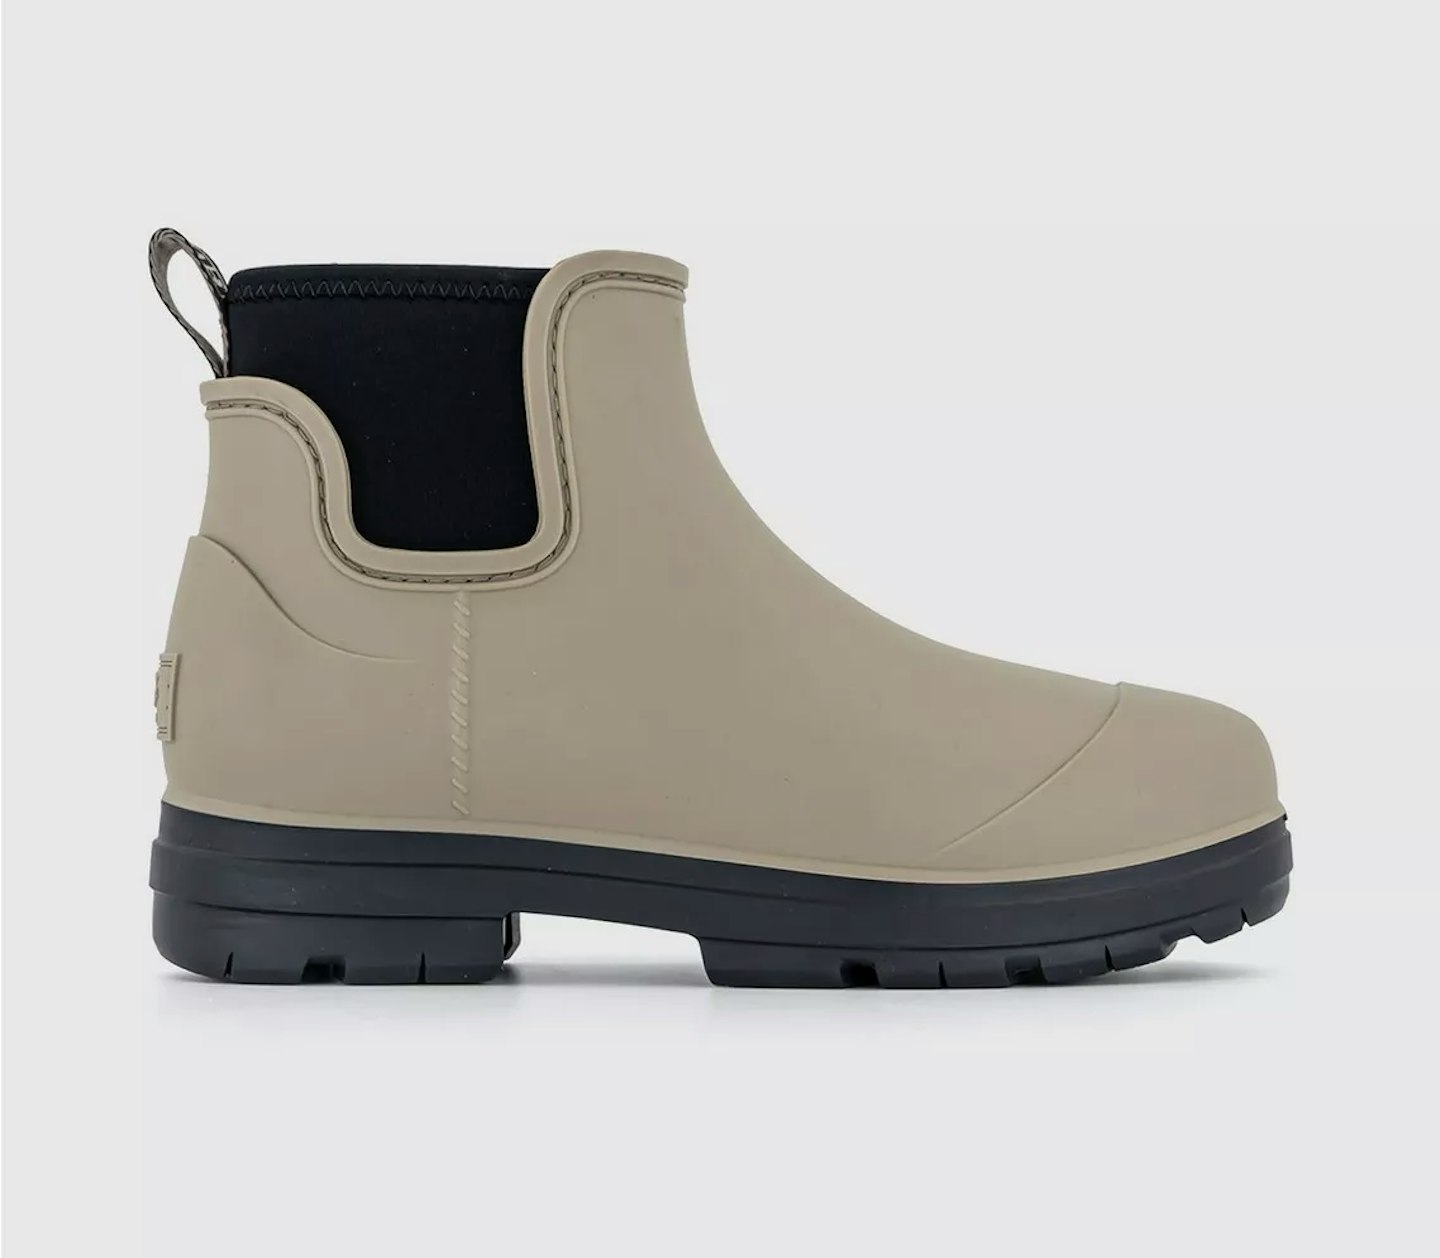 UGG Droplet Rain Boots Taupe